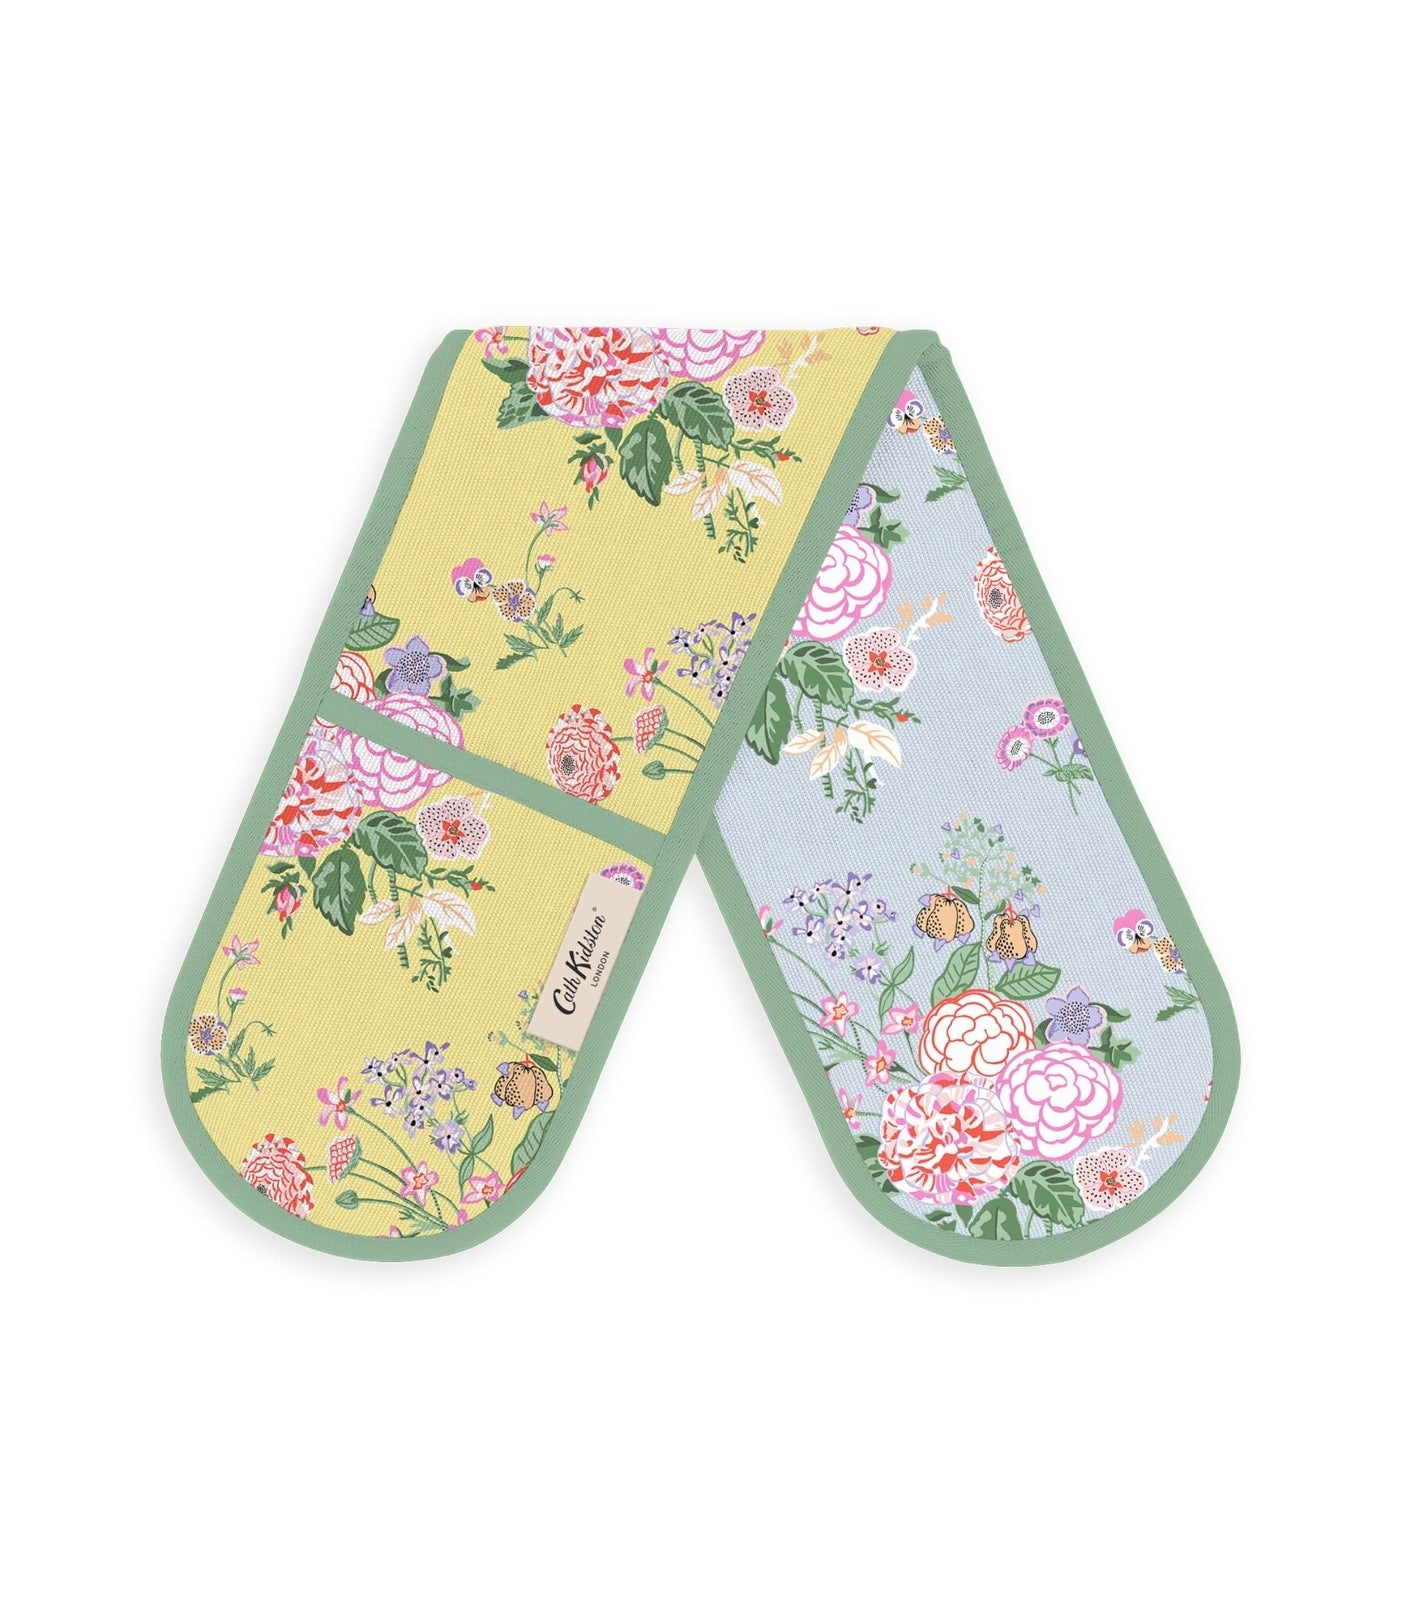 Cath Kidston Floral Fields Double Oven Glove 1 Shaws Department Stores